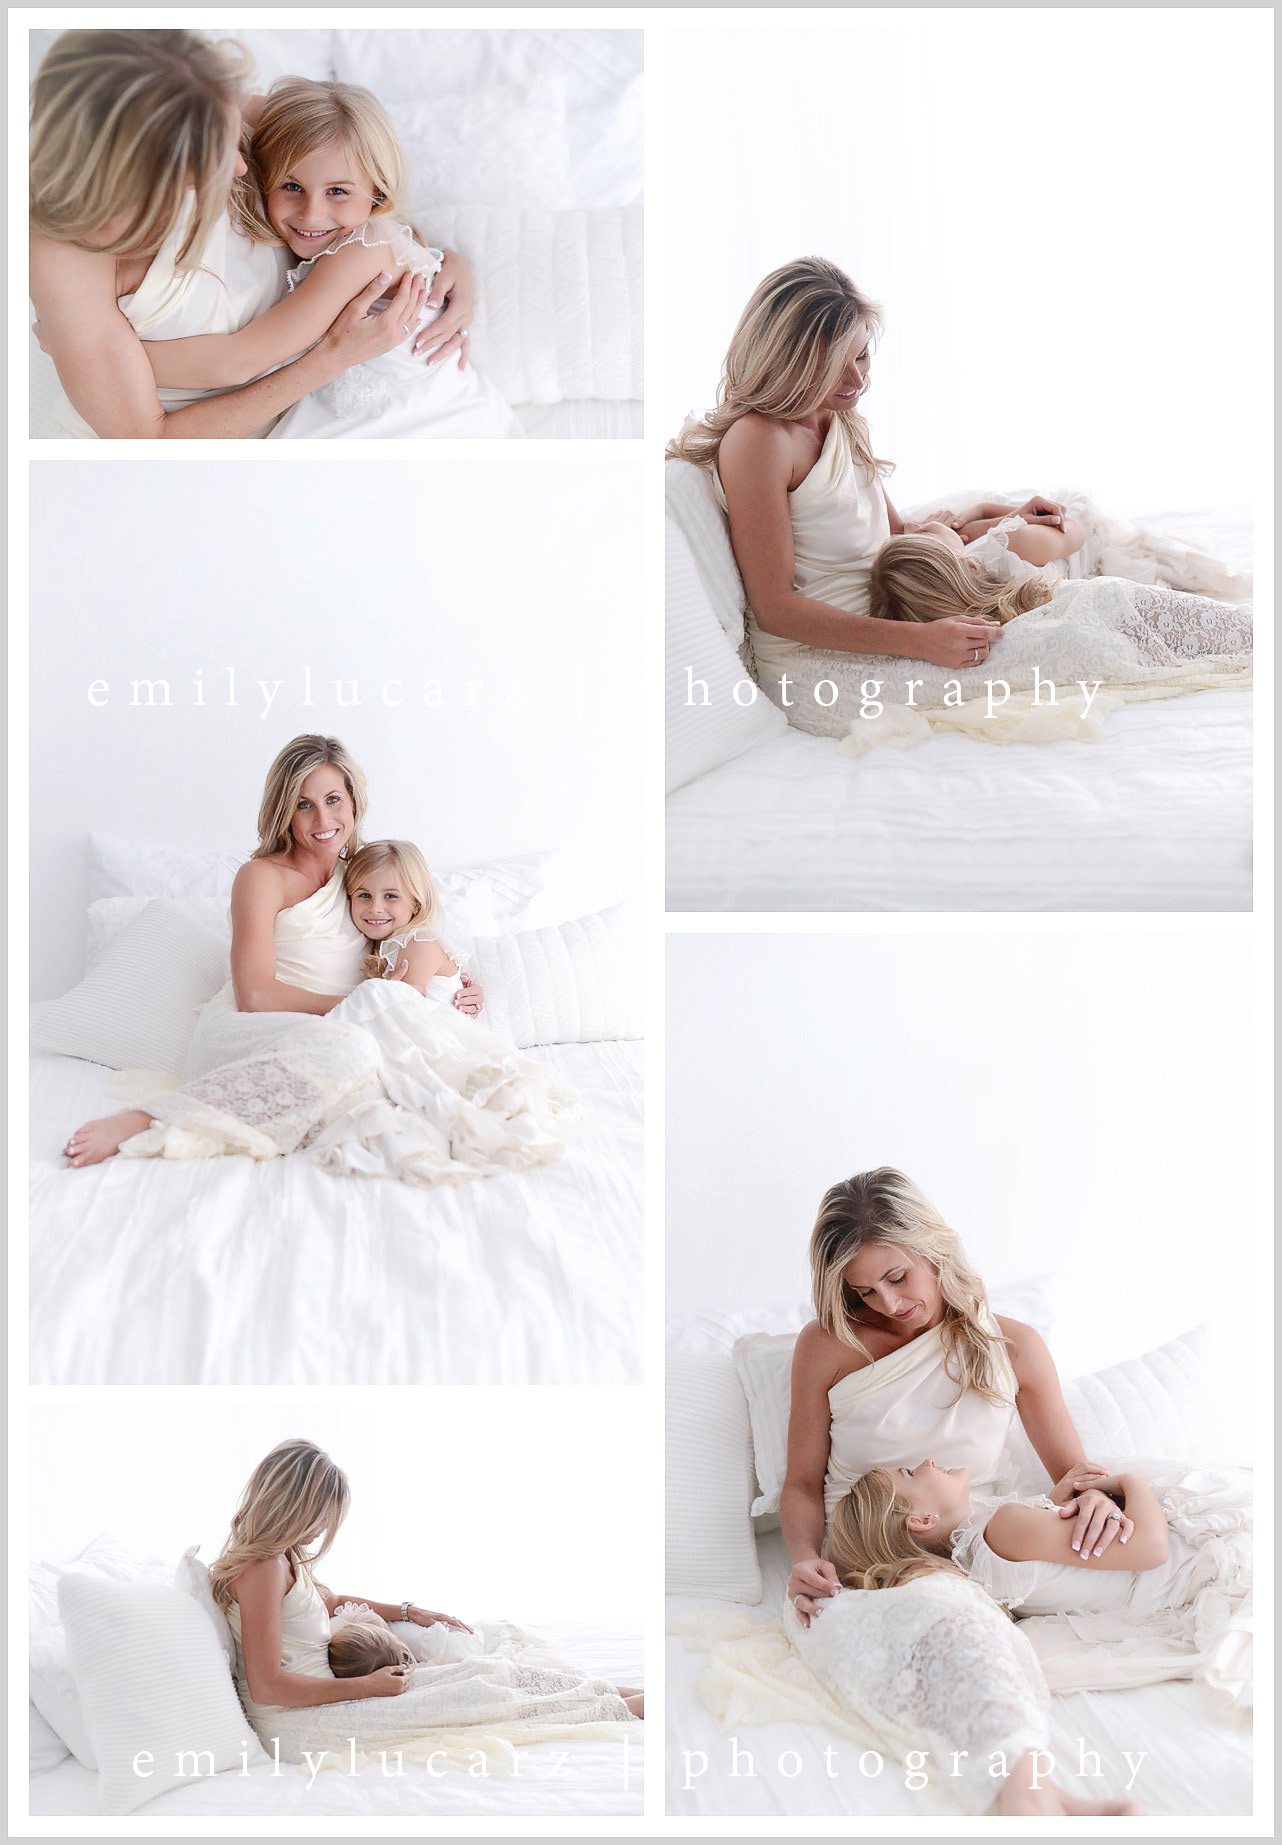 mom and daughter photo ideas